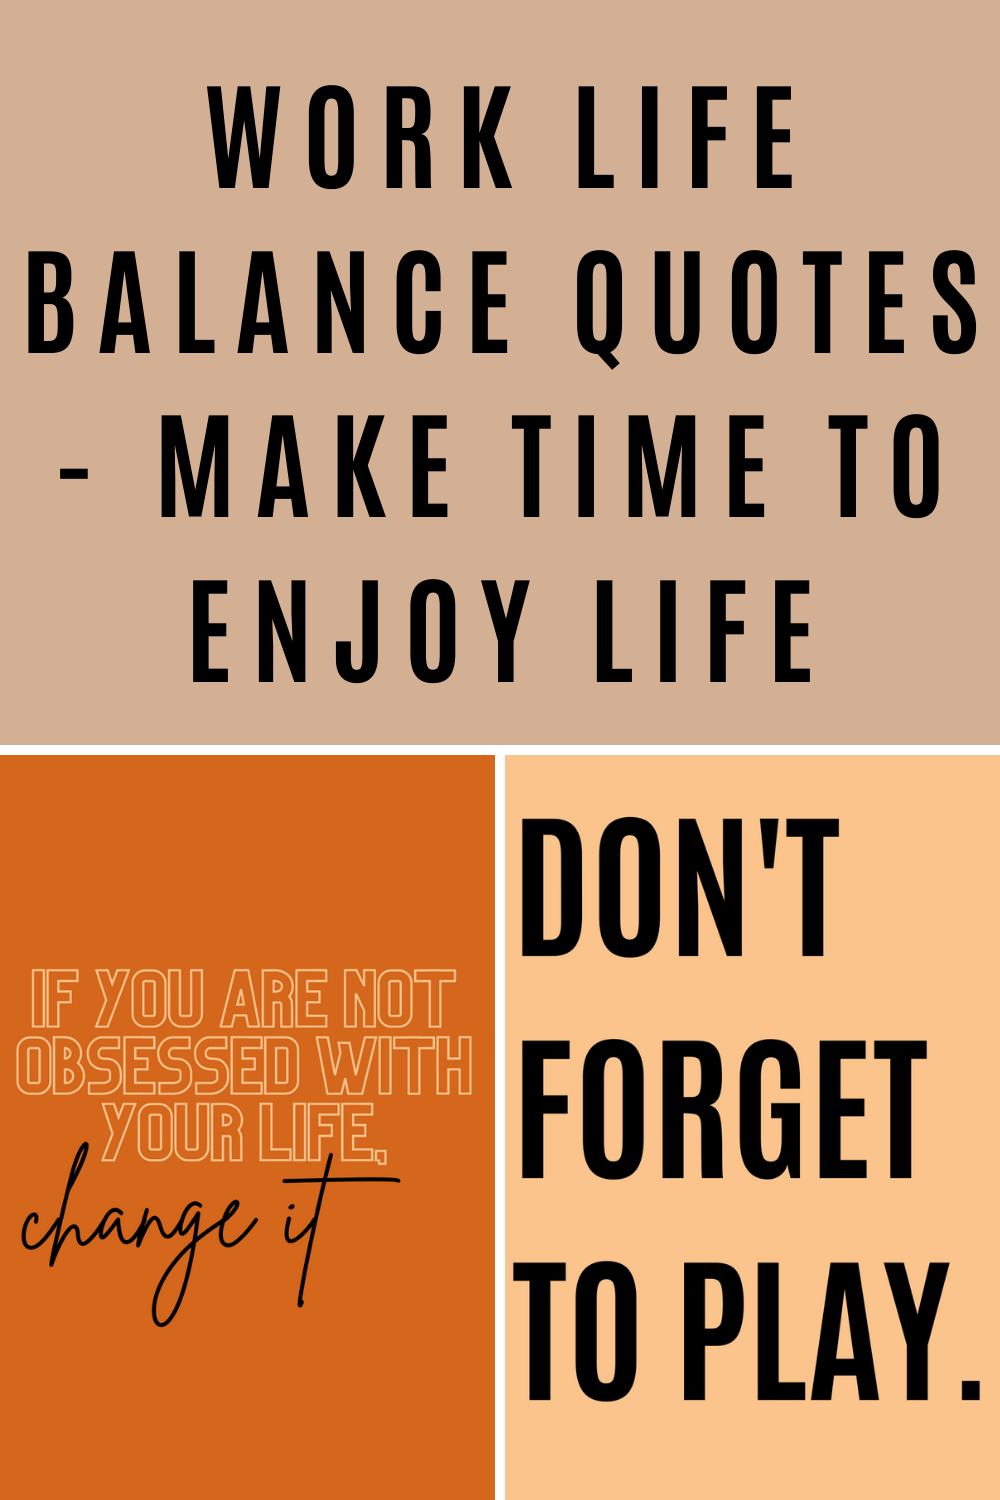 15 Great Quotes About Work-Life Balance Is one of your career goals this year to create a better work-life balance? Perhaps you’re overwhelmed by your commute or tired of putting your personal relationships on the back burner for an intense workload? Or, maybe you’ve seen others who have seemingly created balance between their personal commitments and their families. Now you’re wondering where and how you get some of that.